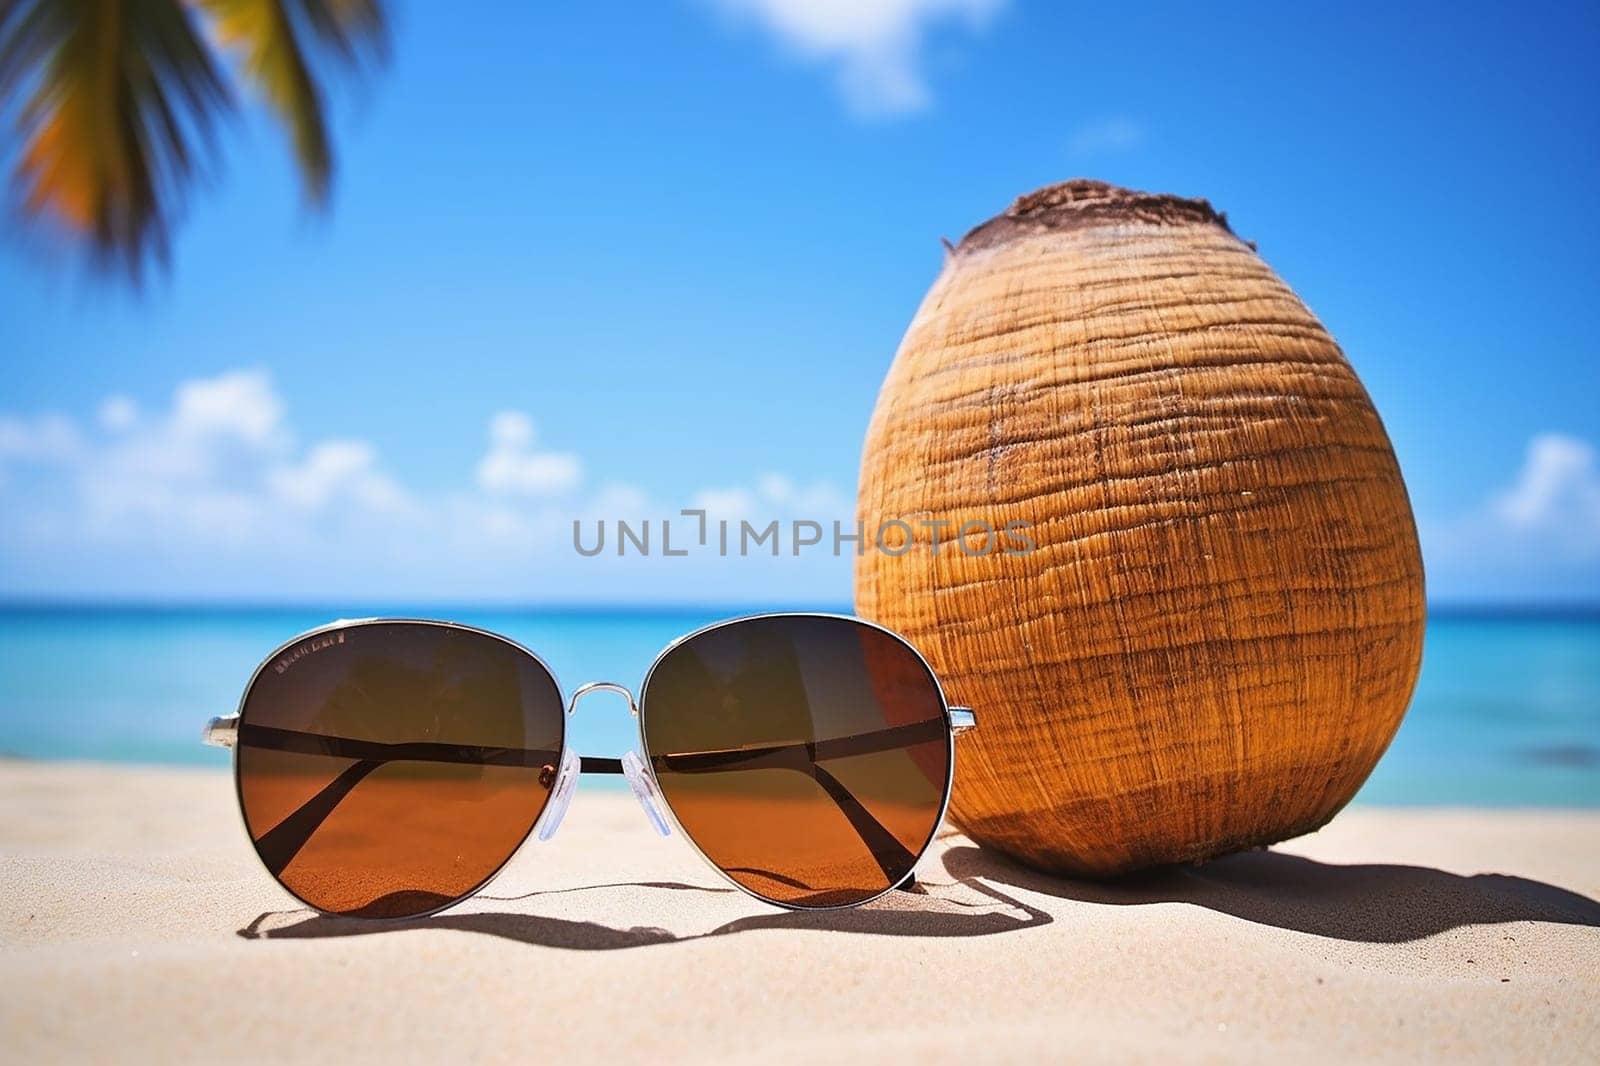 A Perfect Beach Day with Sunglasses and a Coconut on tropical beach, with background by Hype2art